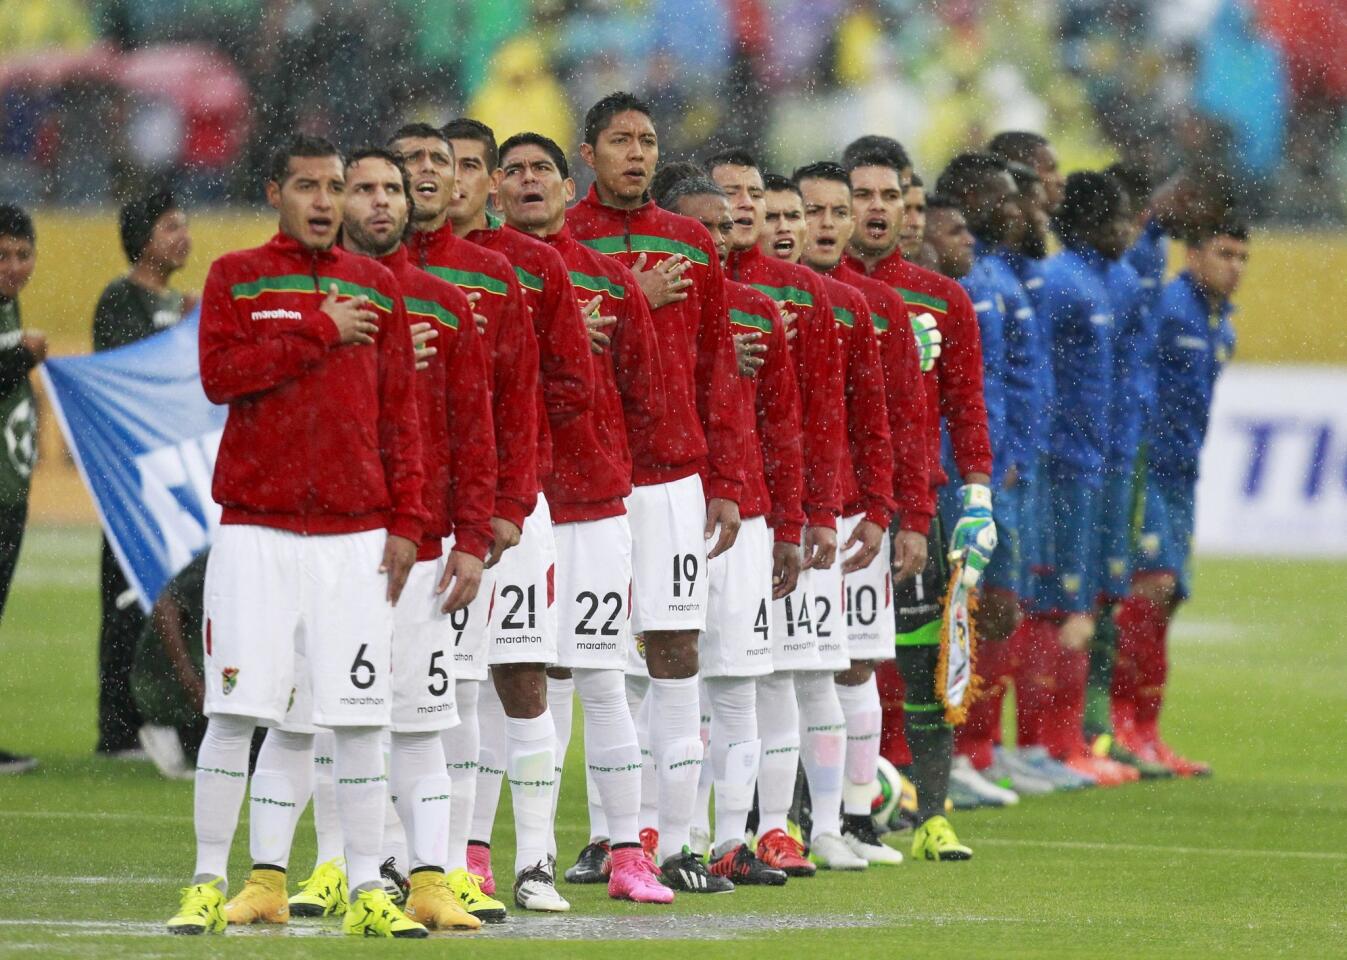 Bolivia's soccer players sing their national anthem in the rain before their 2018 World Cup qualifying soccer match against Ecuador at the Atahualpa stadium in Quito